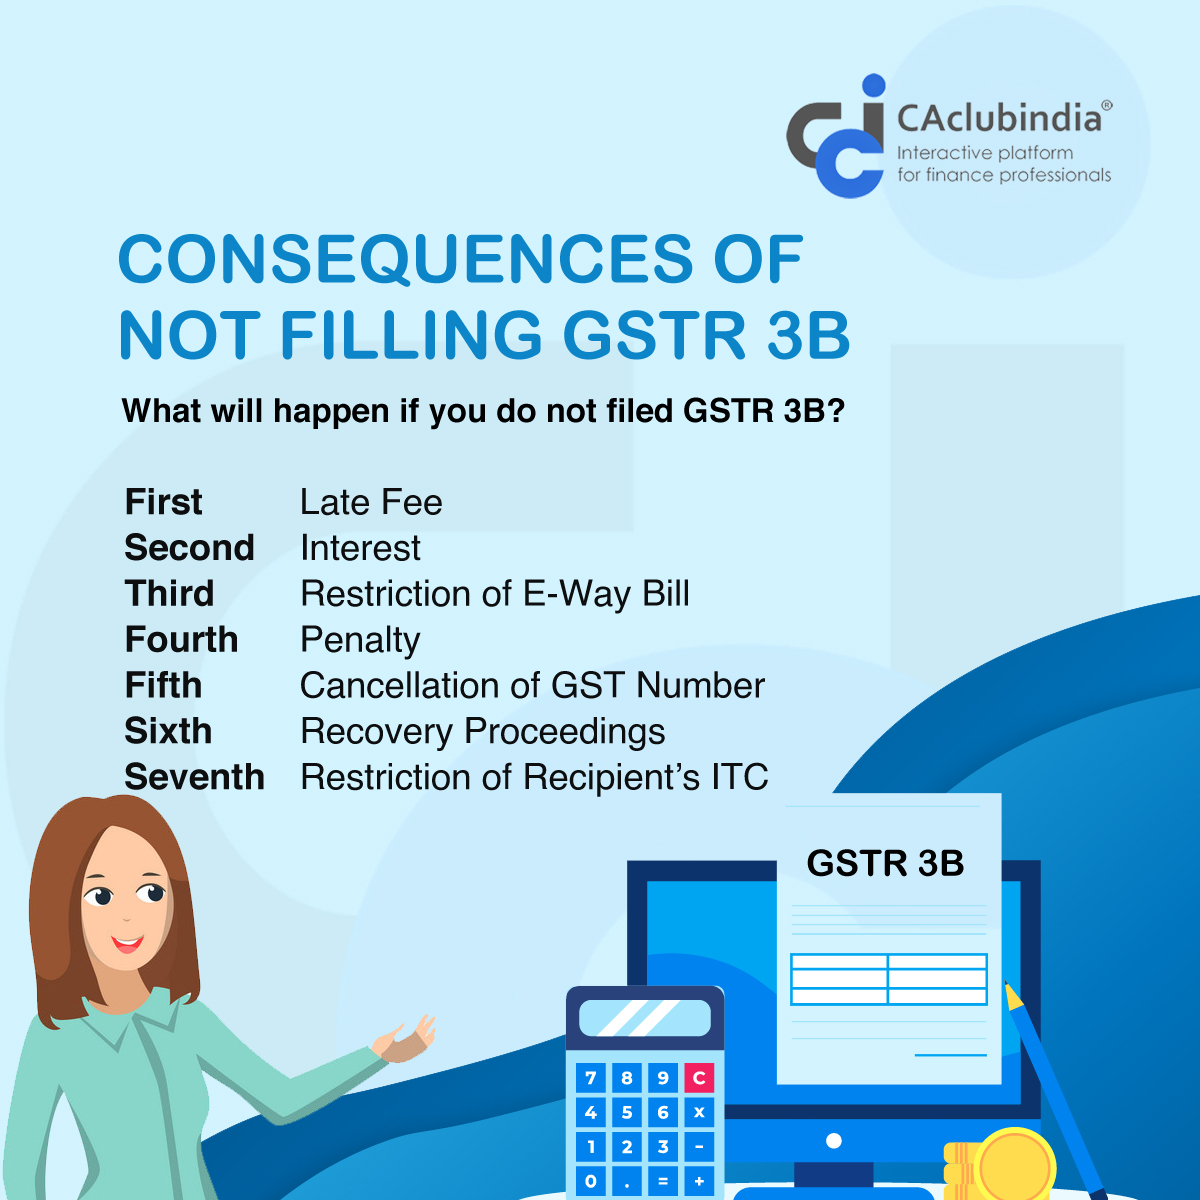 Consequences of not filing GSTR 3B